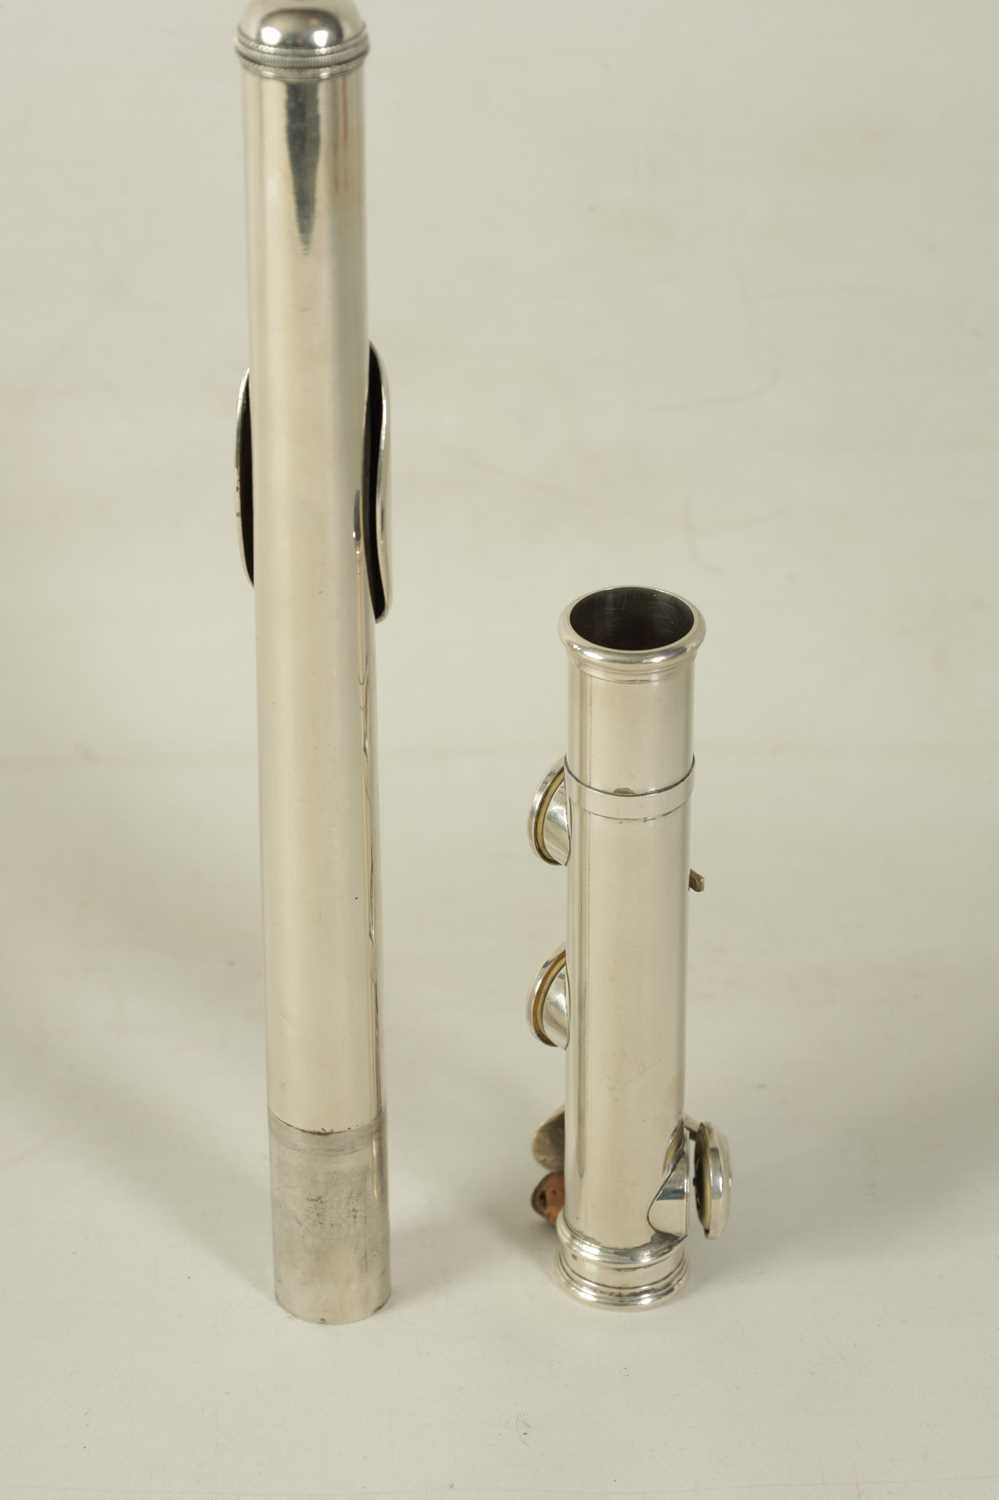 A 19TH CENTURY SOLID SILVER CONCERT FLUTE BY CLAIR GODFROY, AINE. PARIS - Image 11 of 15